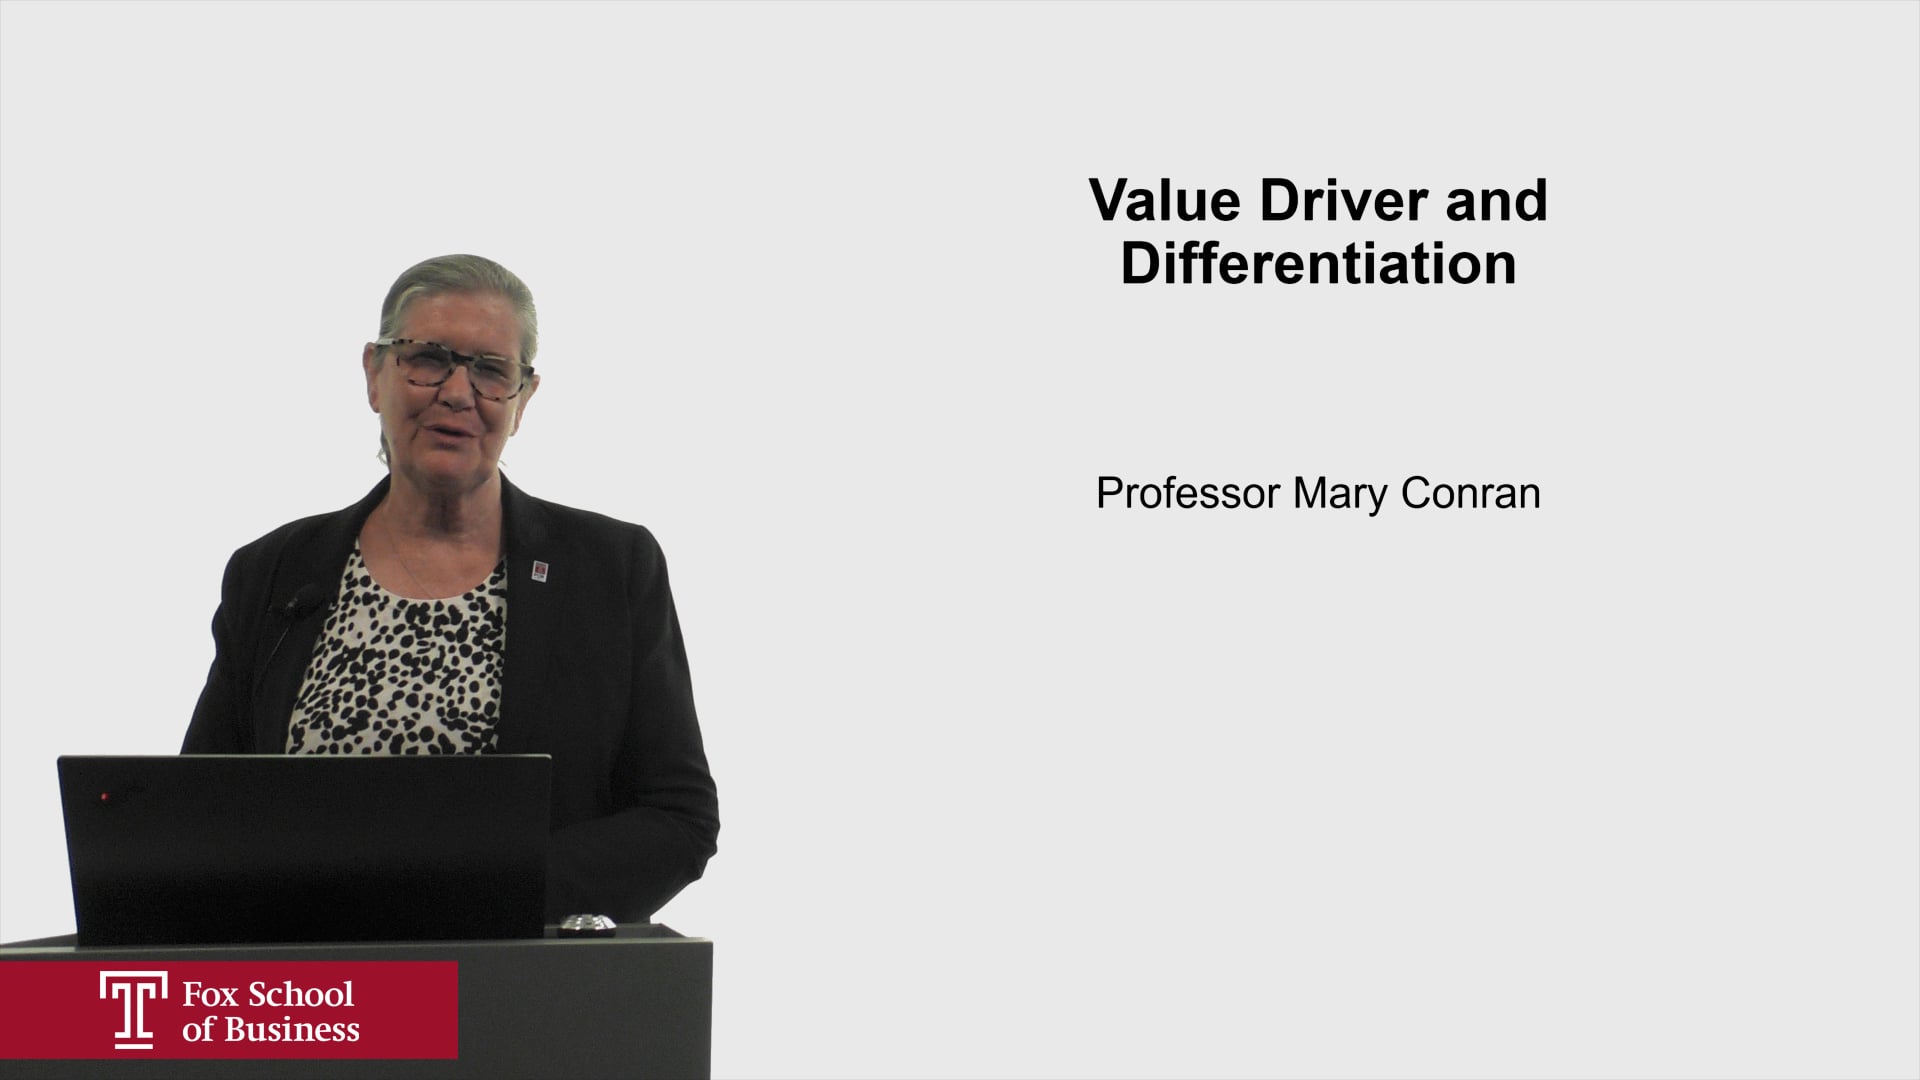 Value Driver and Differentiation